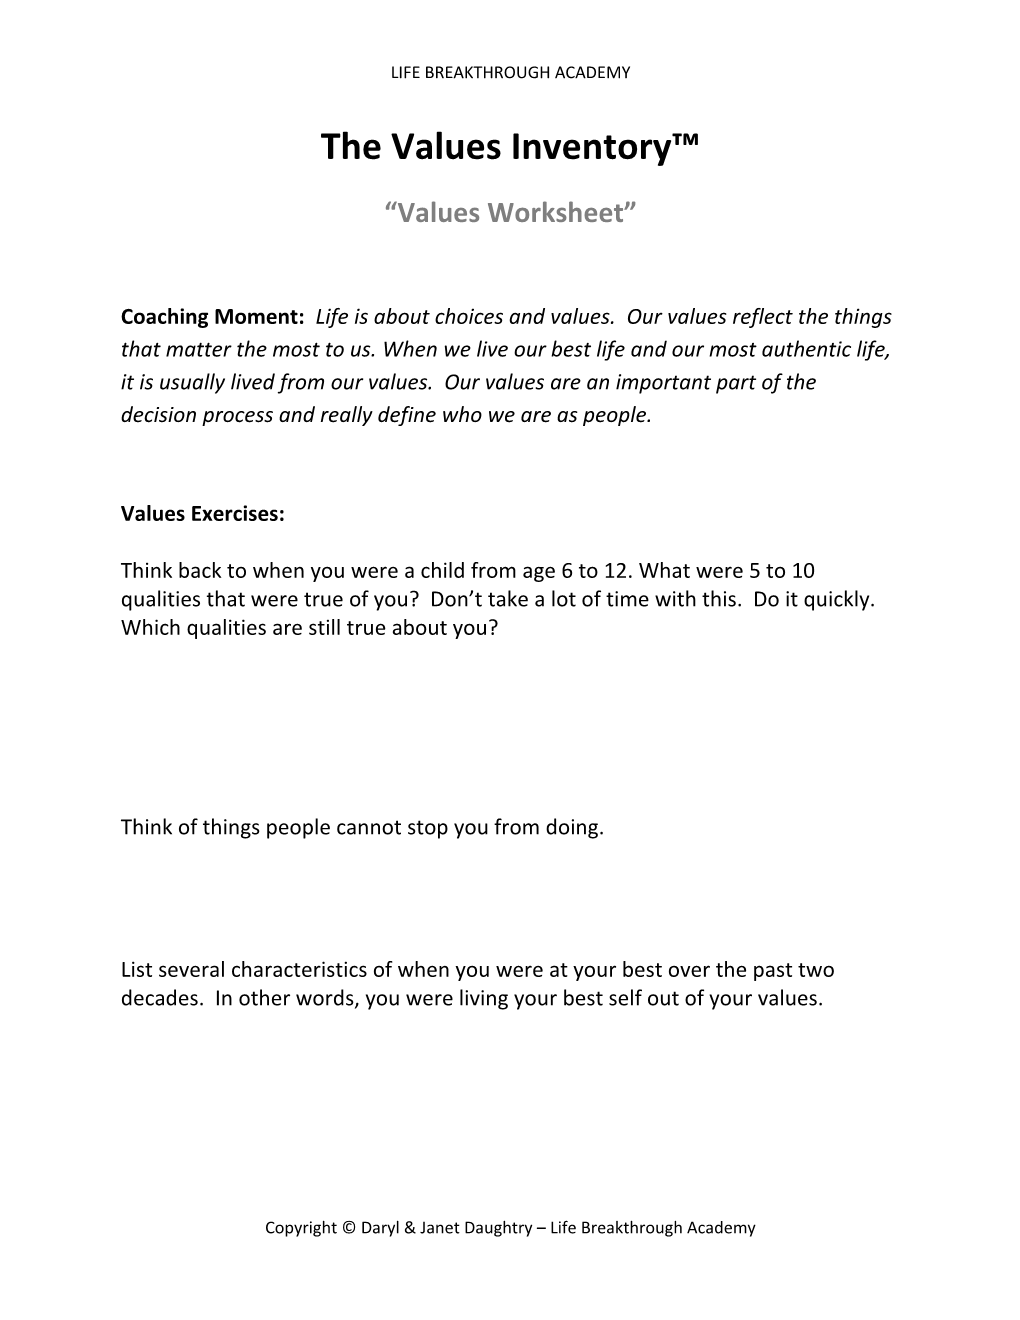 The Values Inventory